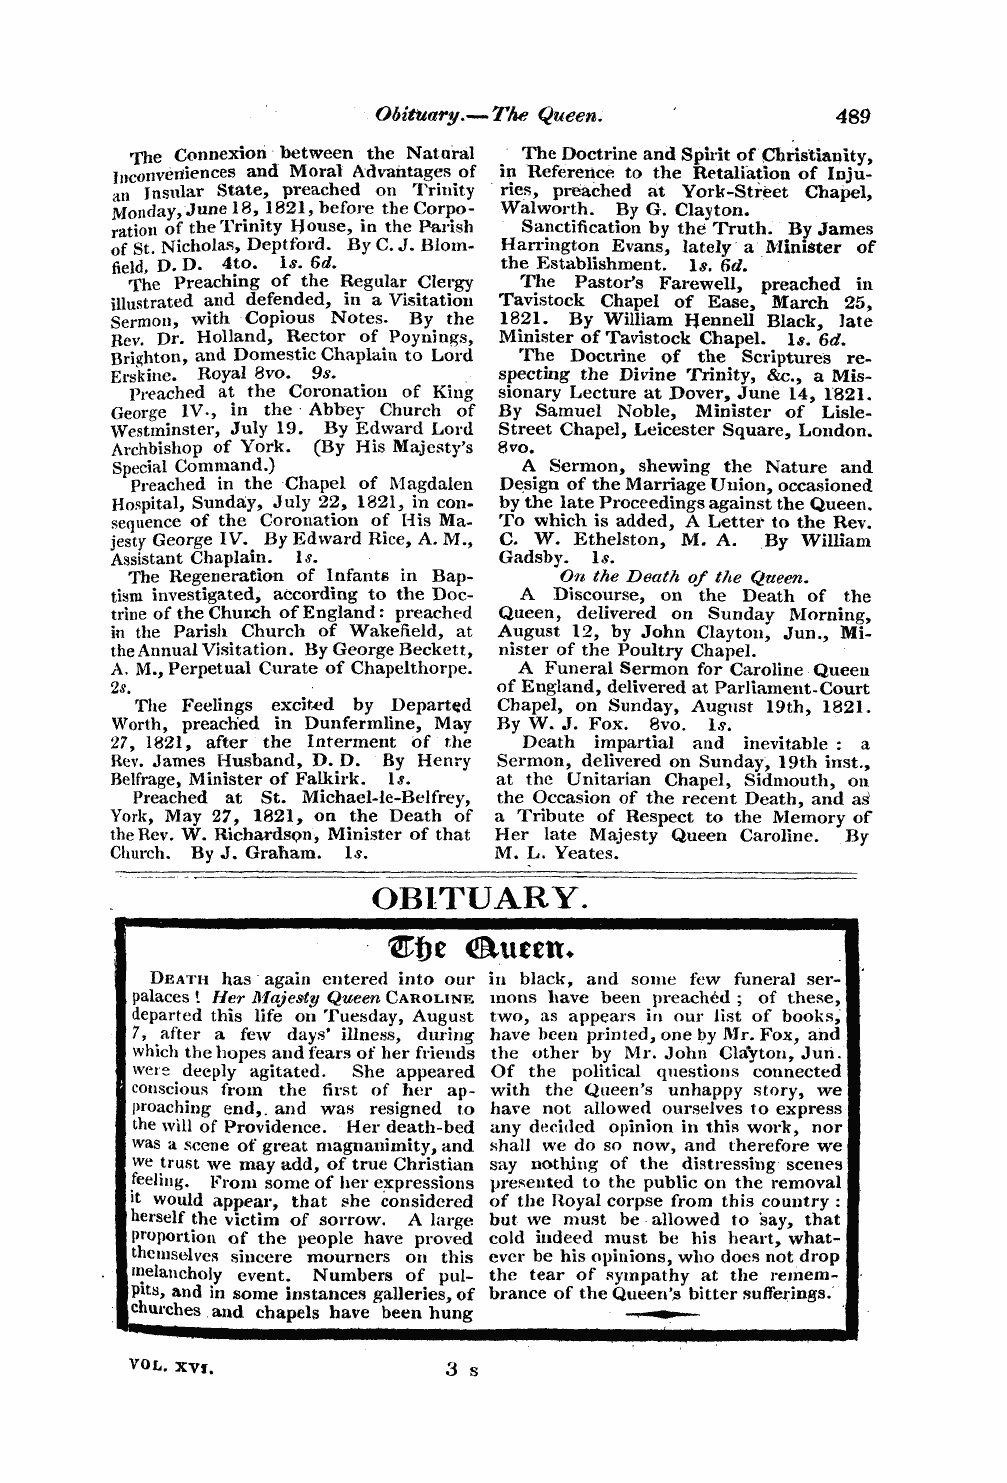 Monthly Repository (1806-1838) and Unitarian Chronicle (1832-1833): F Y, 1st edition - ¦¦¦¦¦¦¦¦ Obituary.